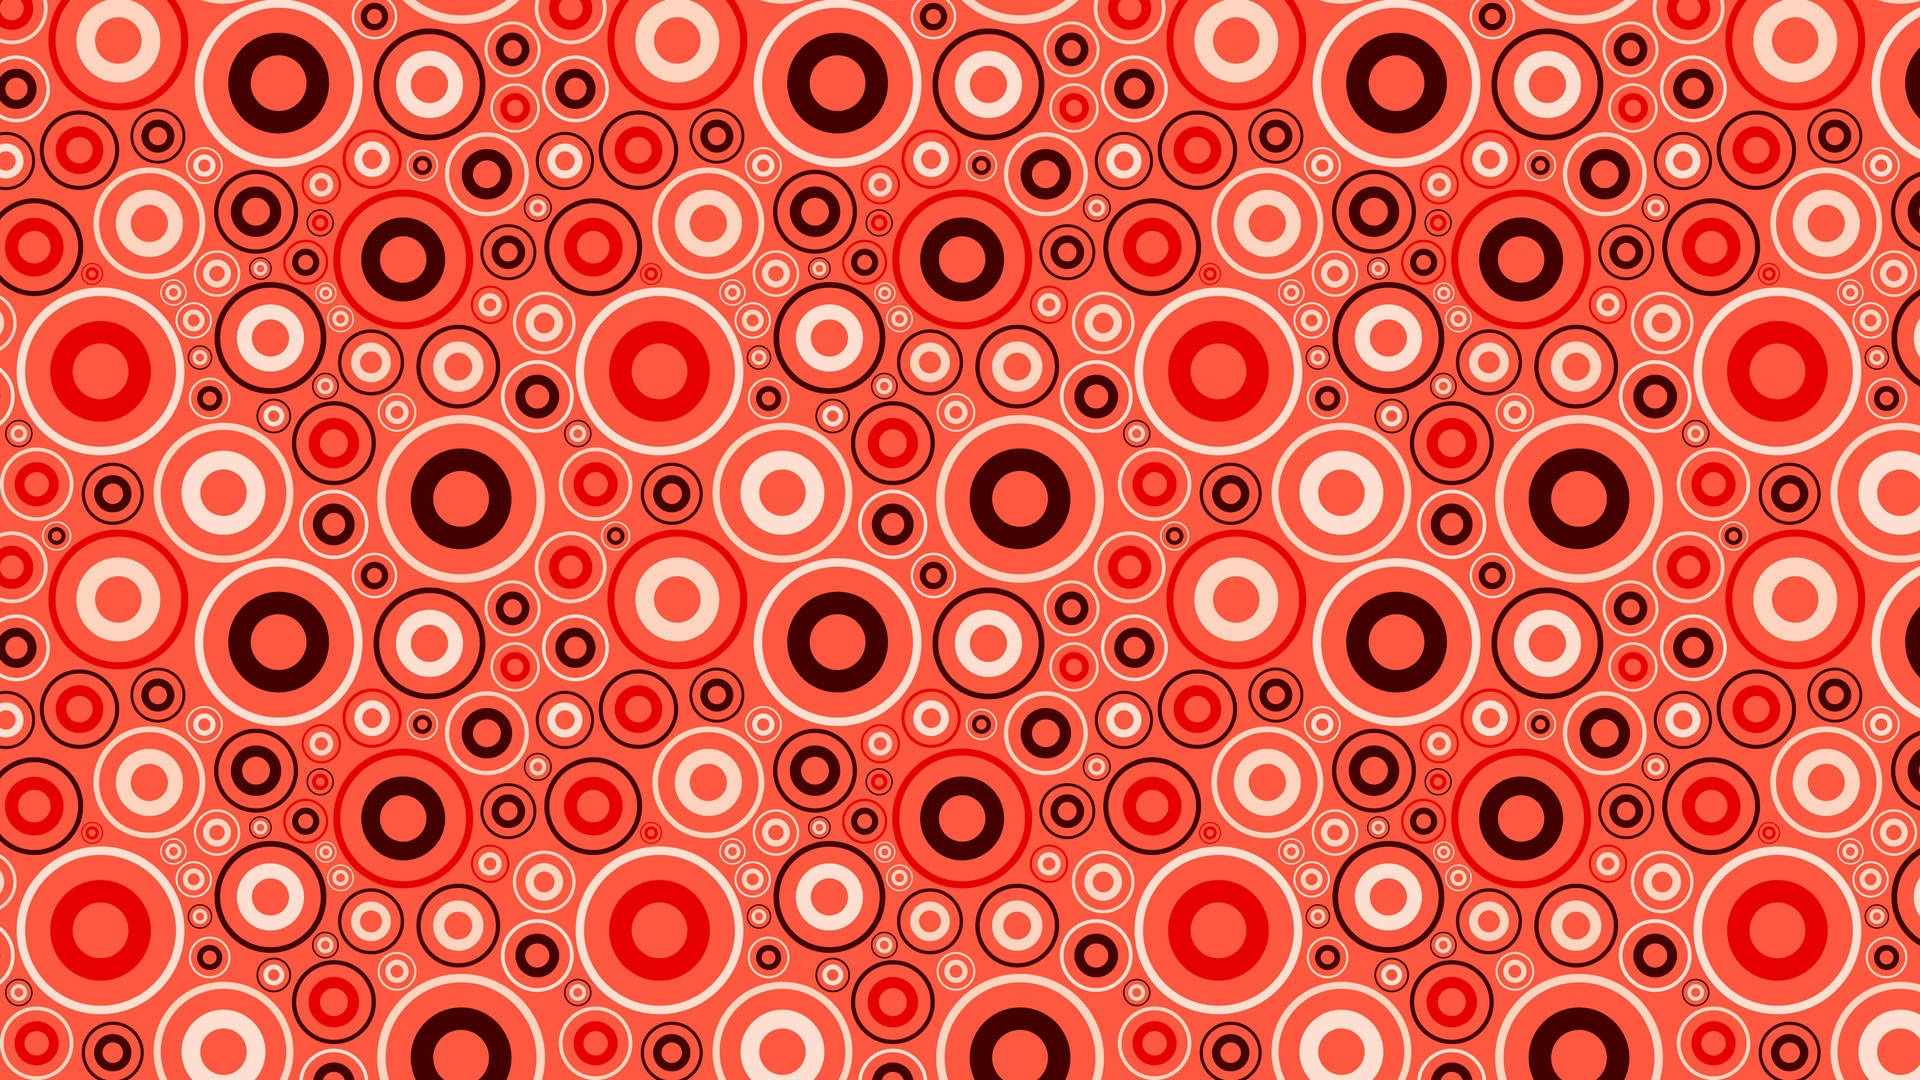 Free Red Circle Wallpaper Downloads, [100+] Red Circle Wallpapers for FREE  